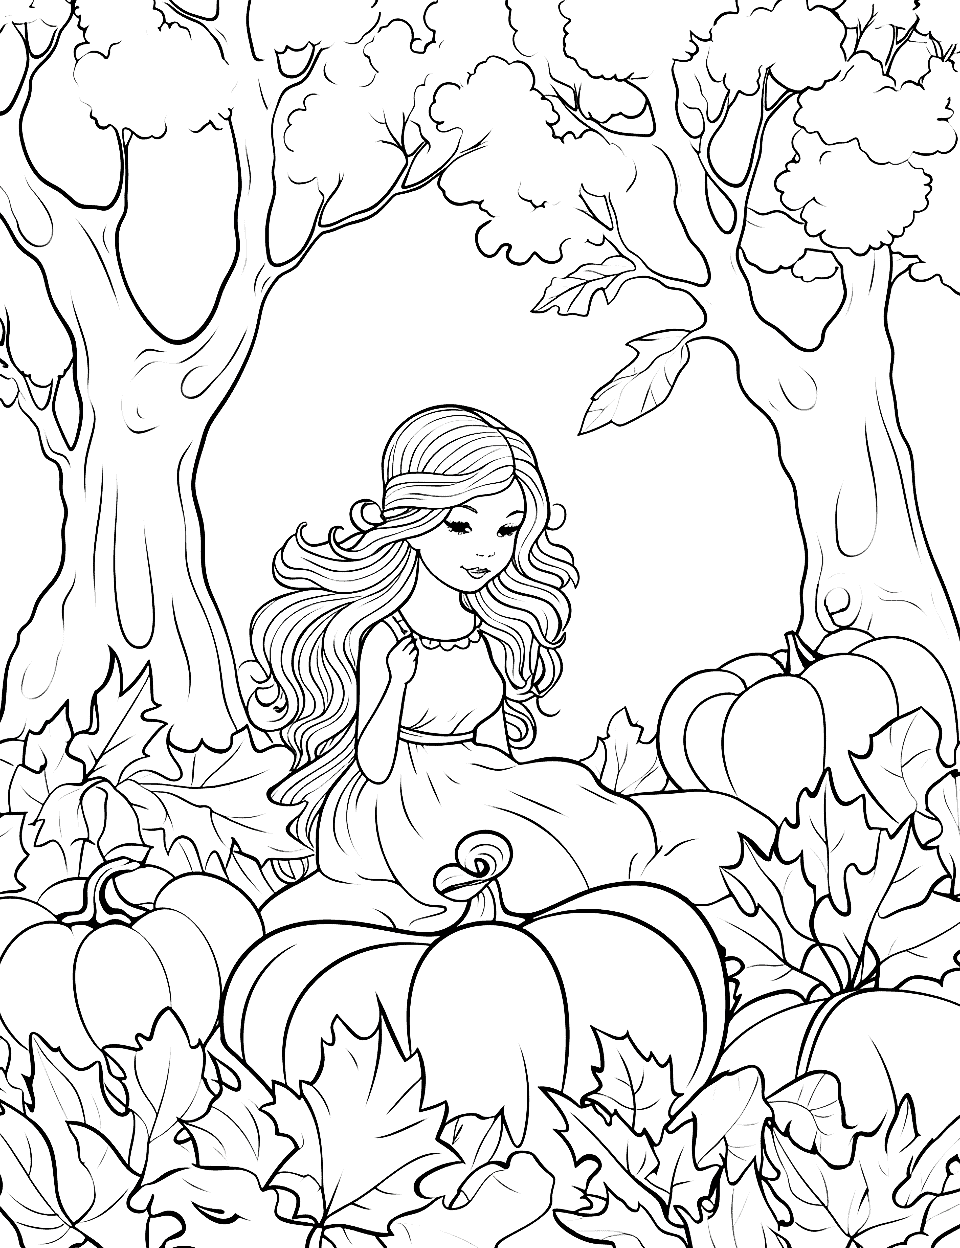 Autumn Fairy Tale Fall Coloring Page - A coloring sheet featuring a fairy in a magical autumn forest.